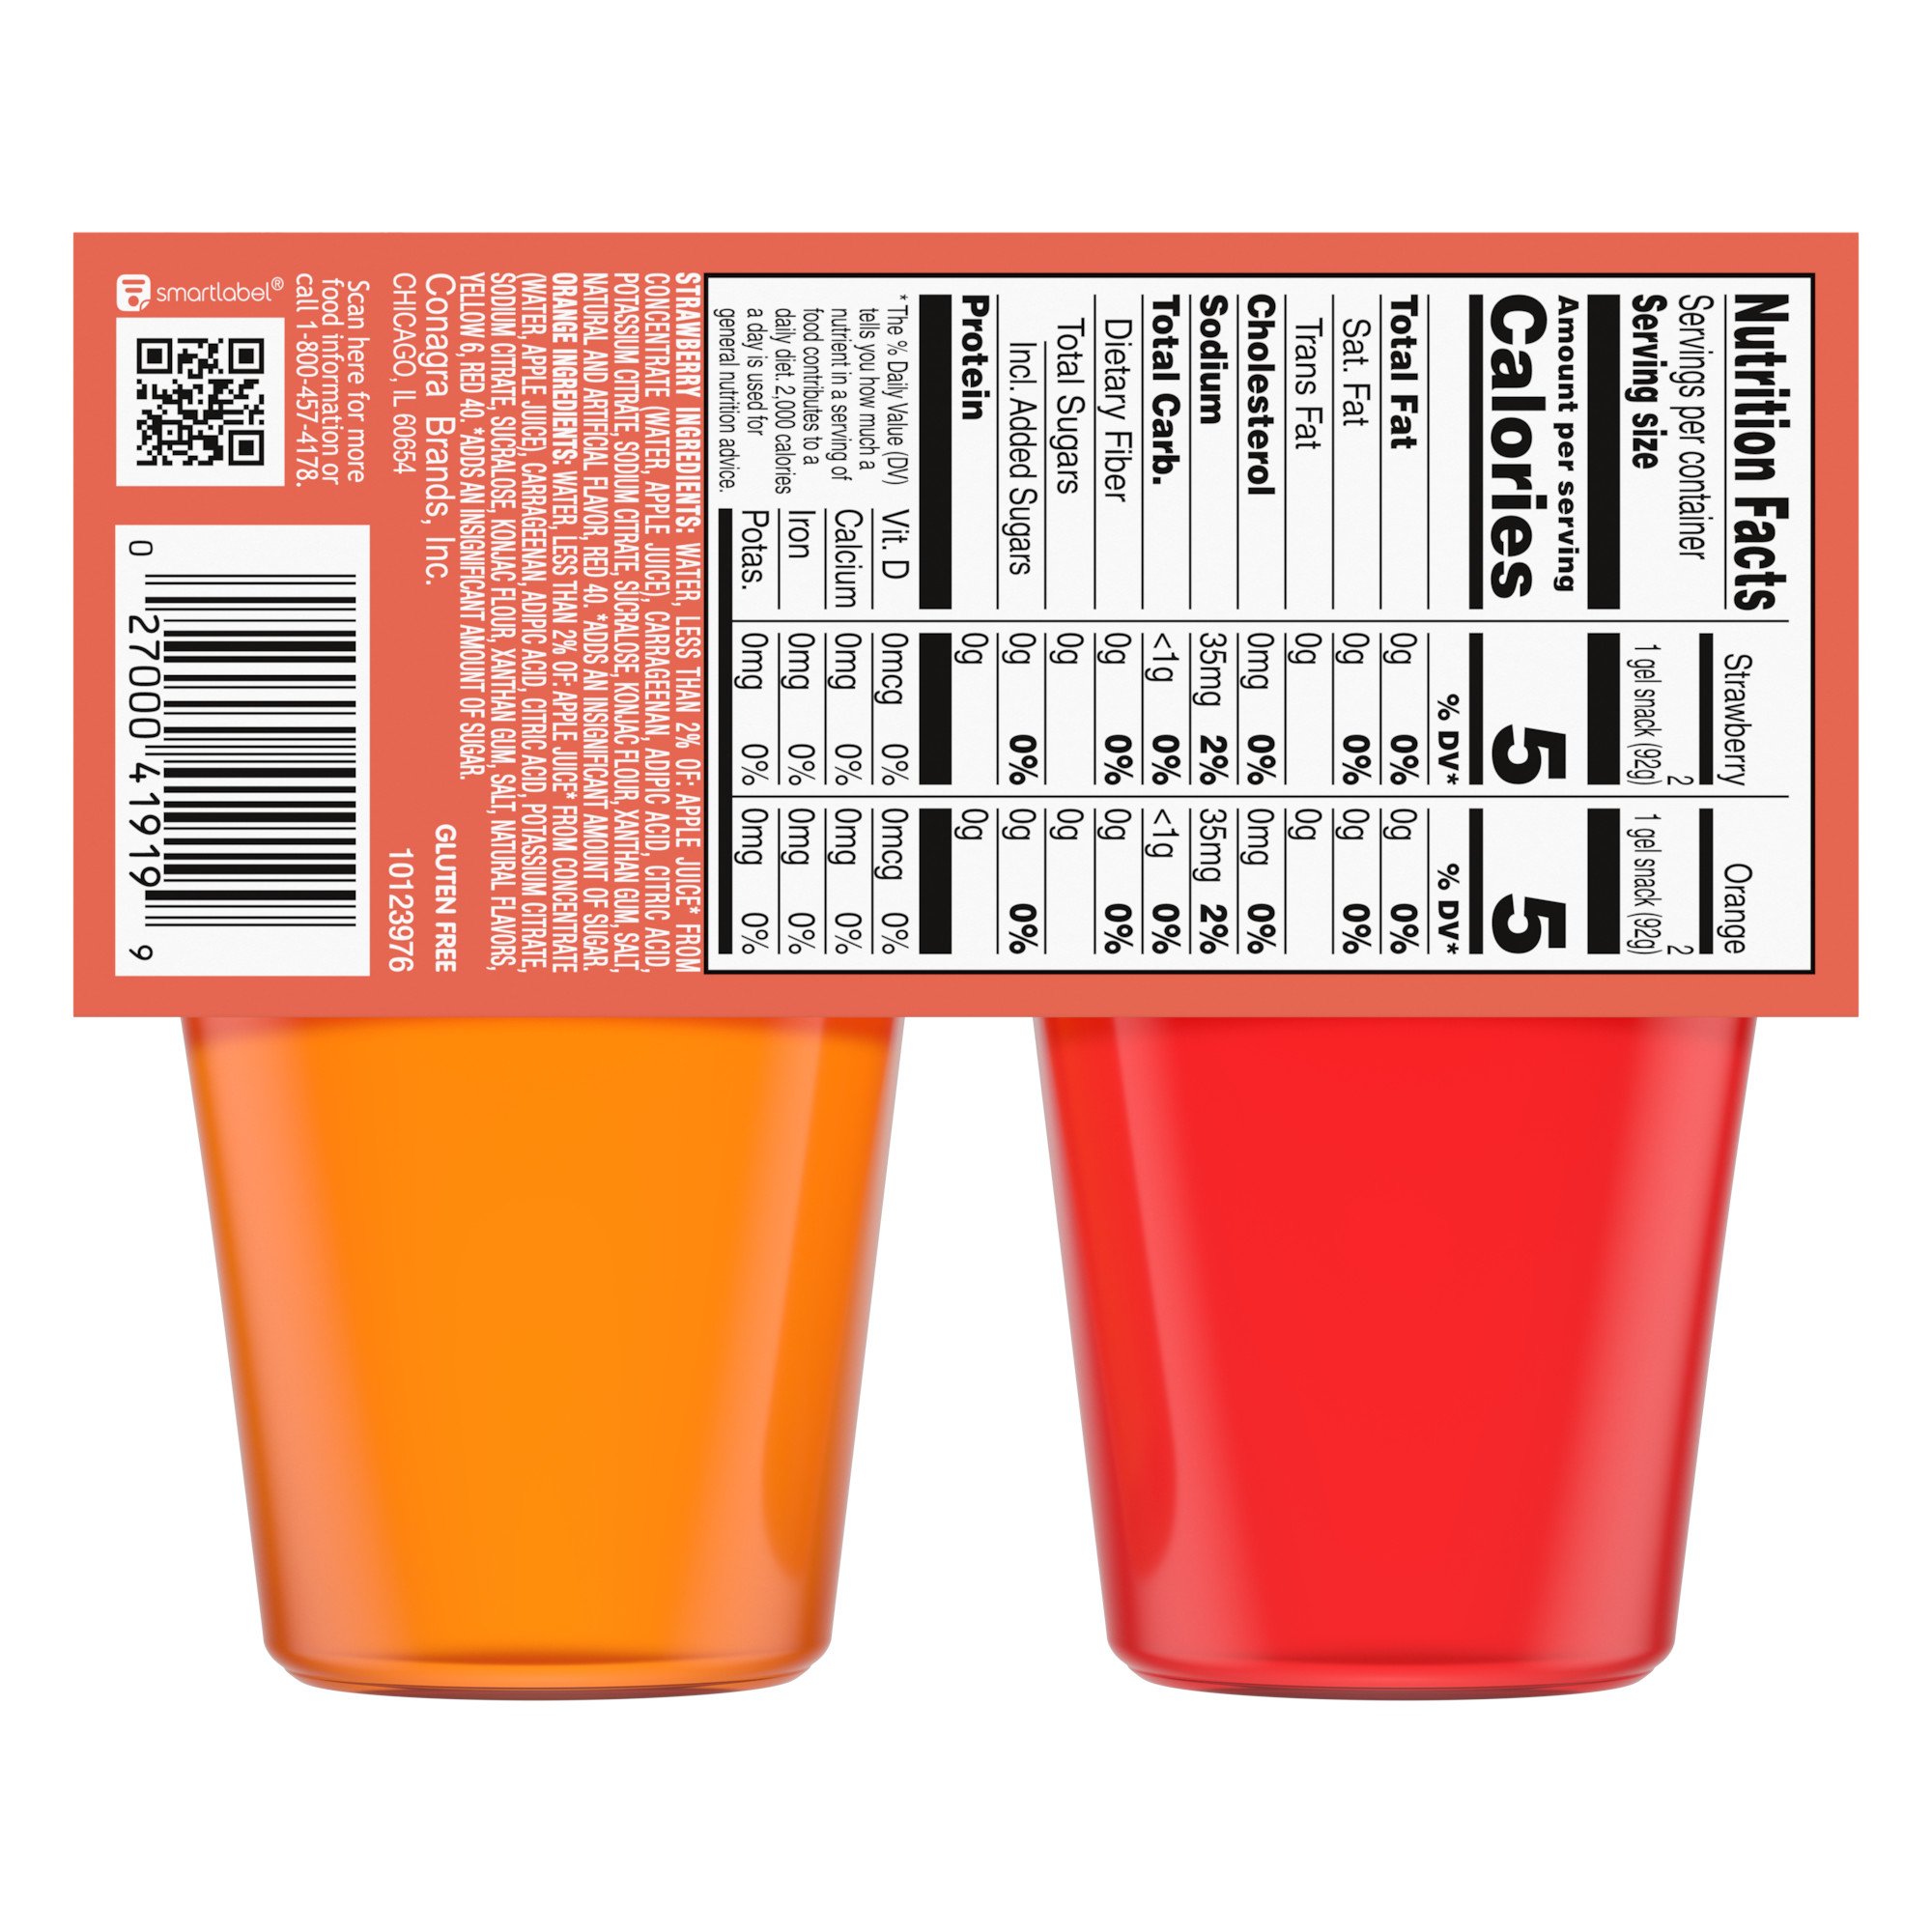 Snack Pack Sour Patch Kids Blue Raspberry Juicy Gels Cups - Shop Pudding &  Gelatin at H-E-B